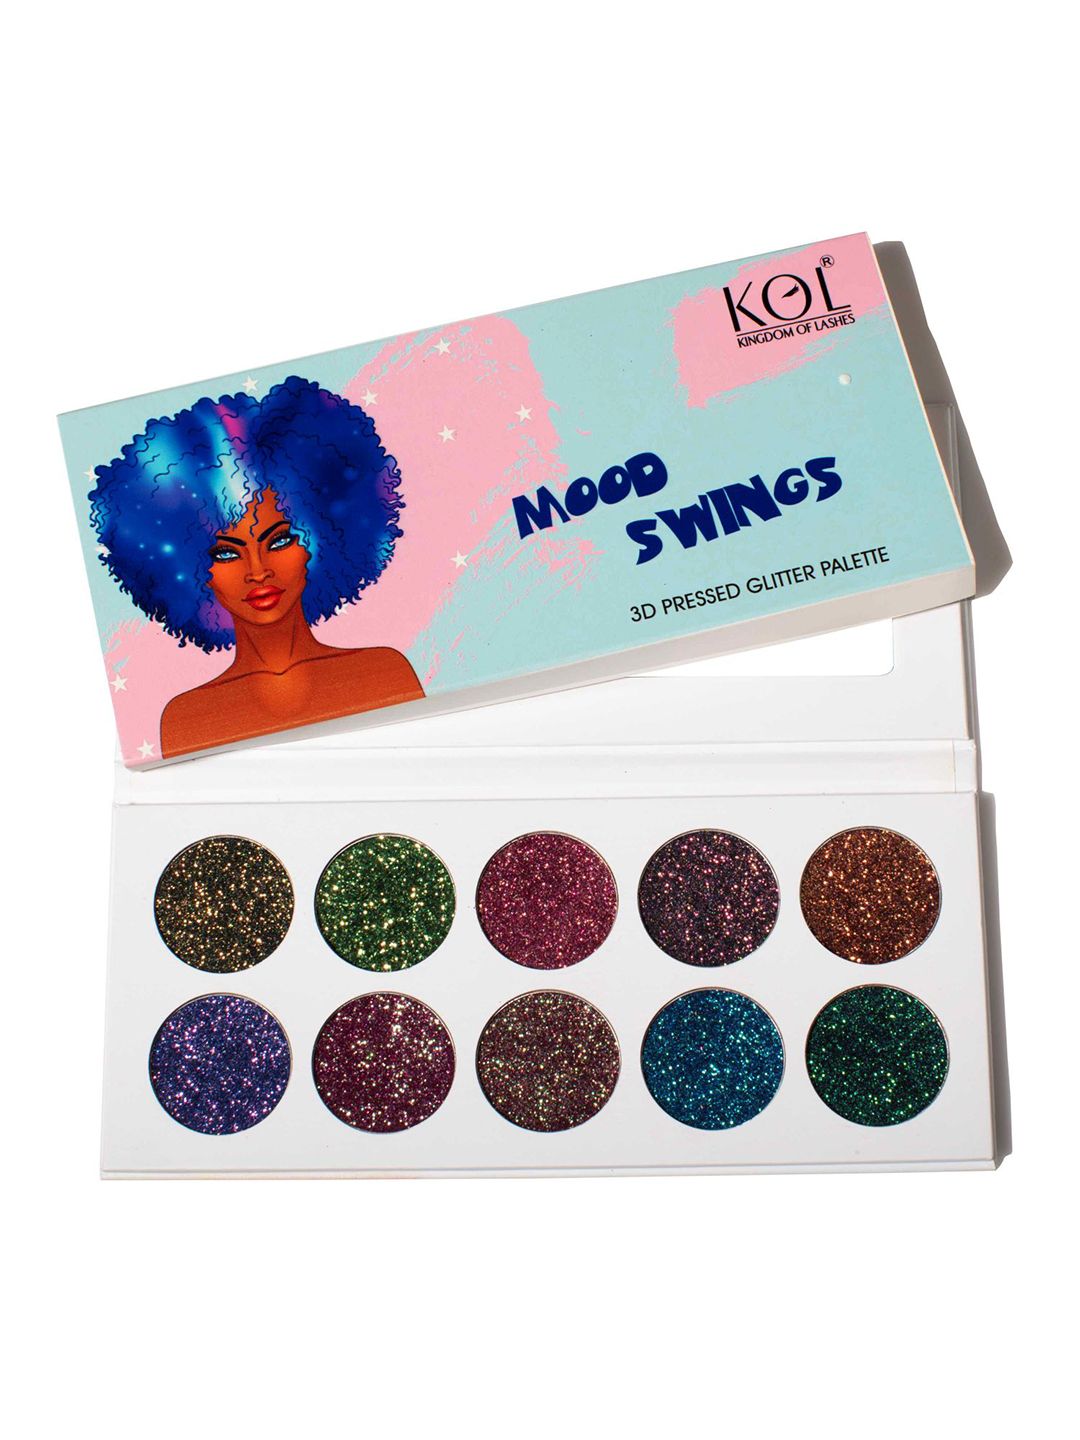 KINGDOM OF LASHES Mood Swings 3D Pressed Glitter 10 Shades Eyeshadow Palette Price in India